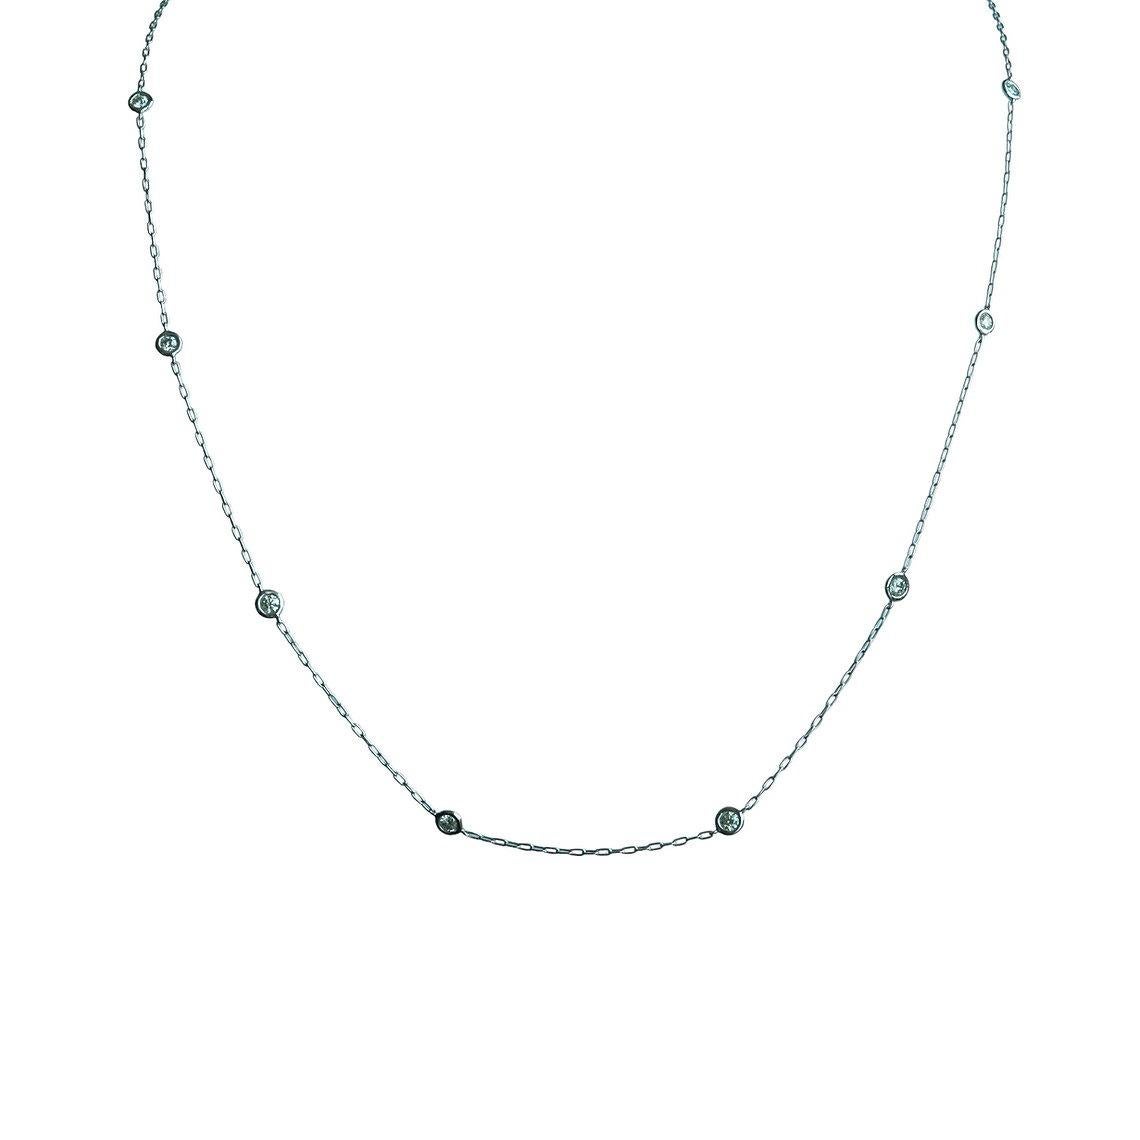 The Natural Diamonds by the Yard, The Natural Diamonds Station Necklace im Zustand „Neu“ im Angebot in Singapore, SG